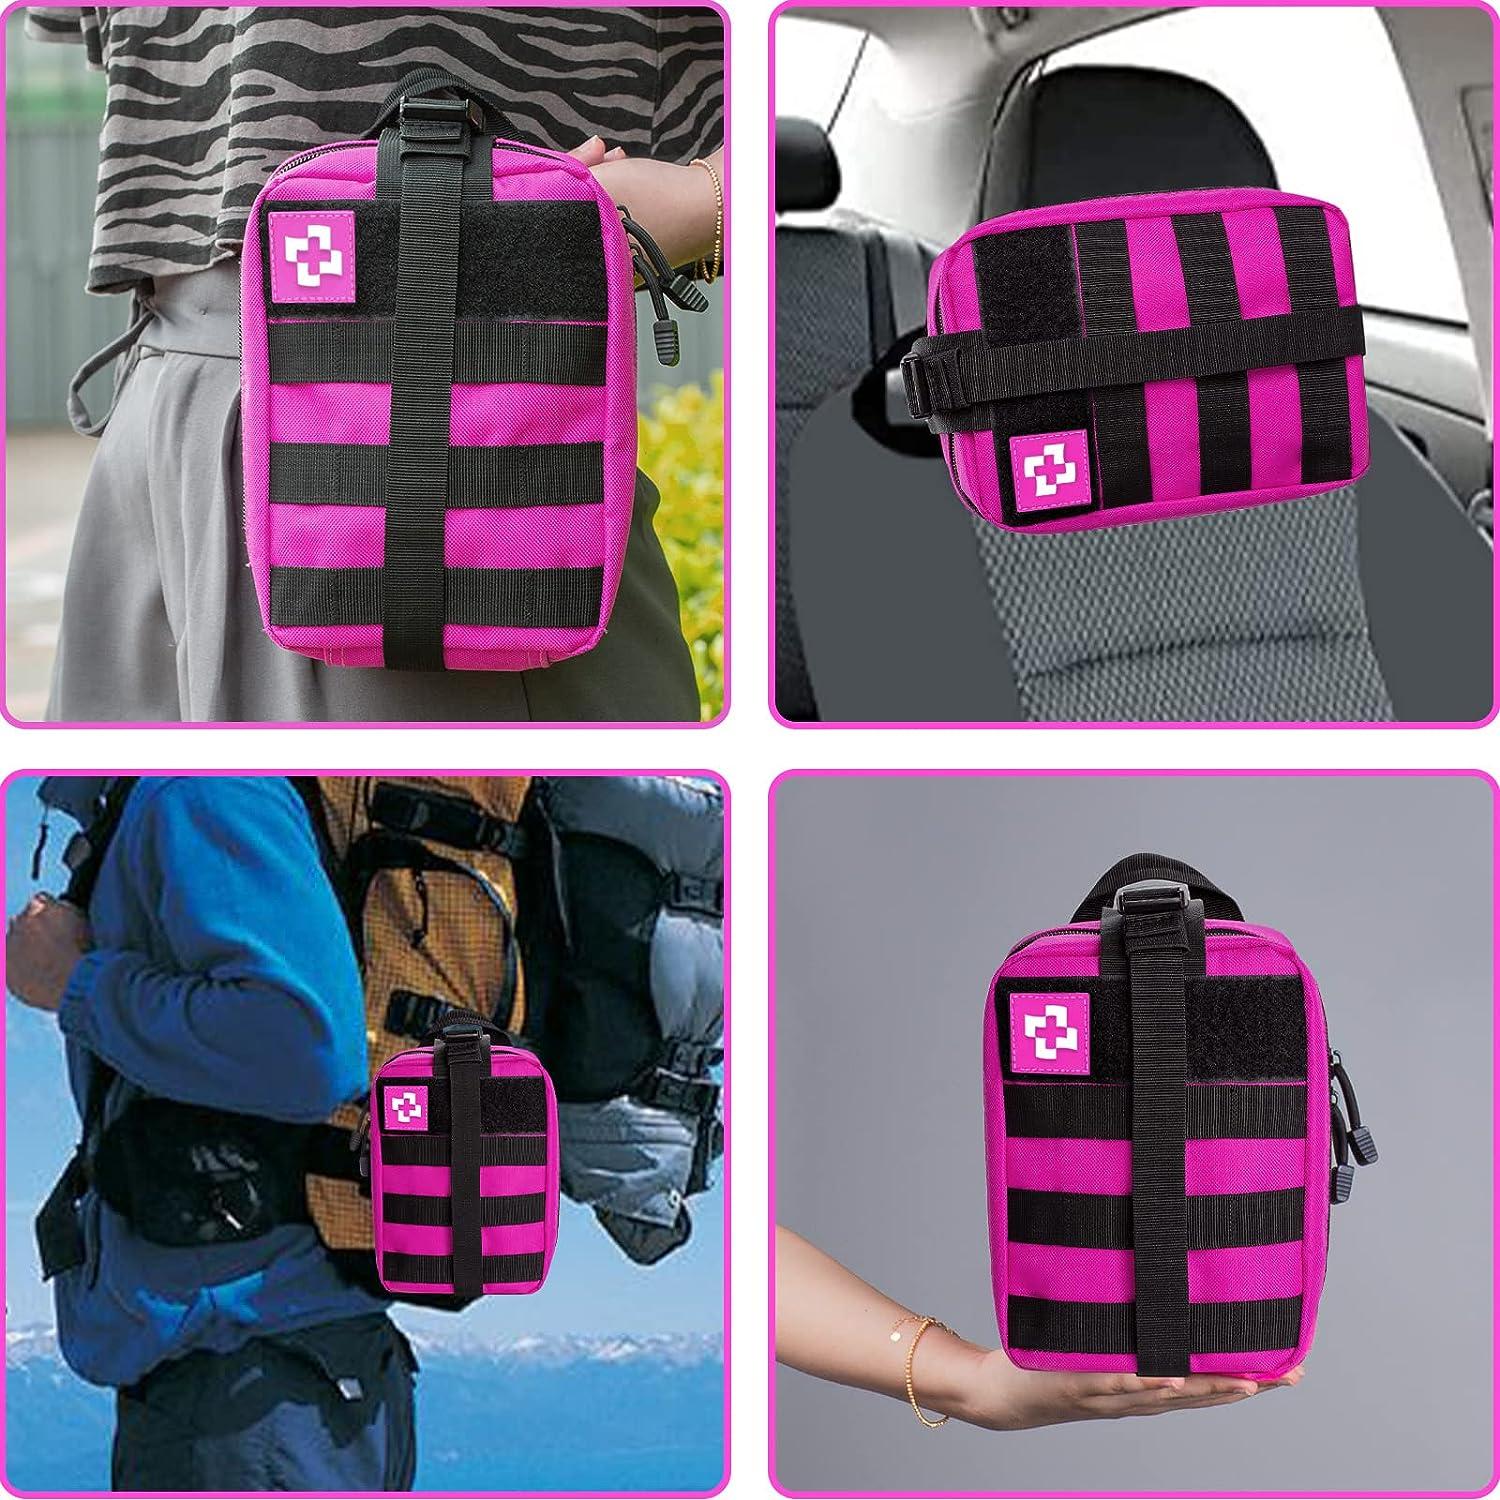 Pink Survival Kit for Women, Camping and Hiking Essentials with